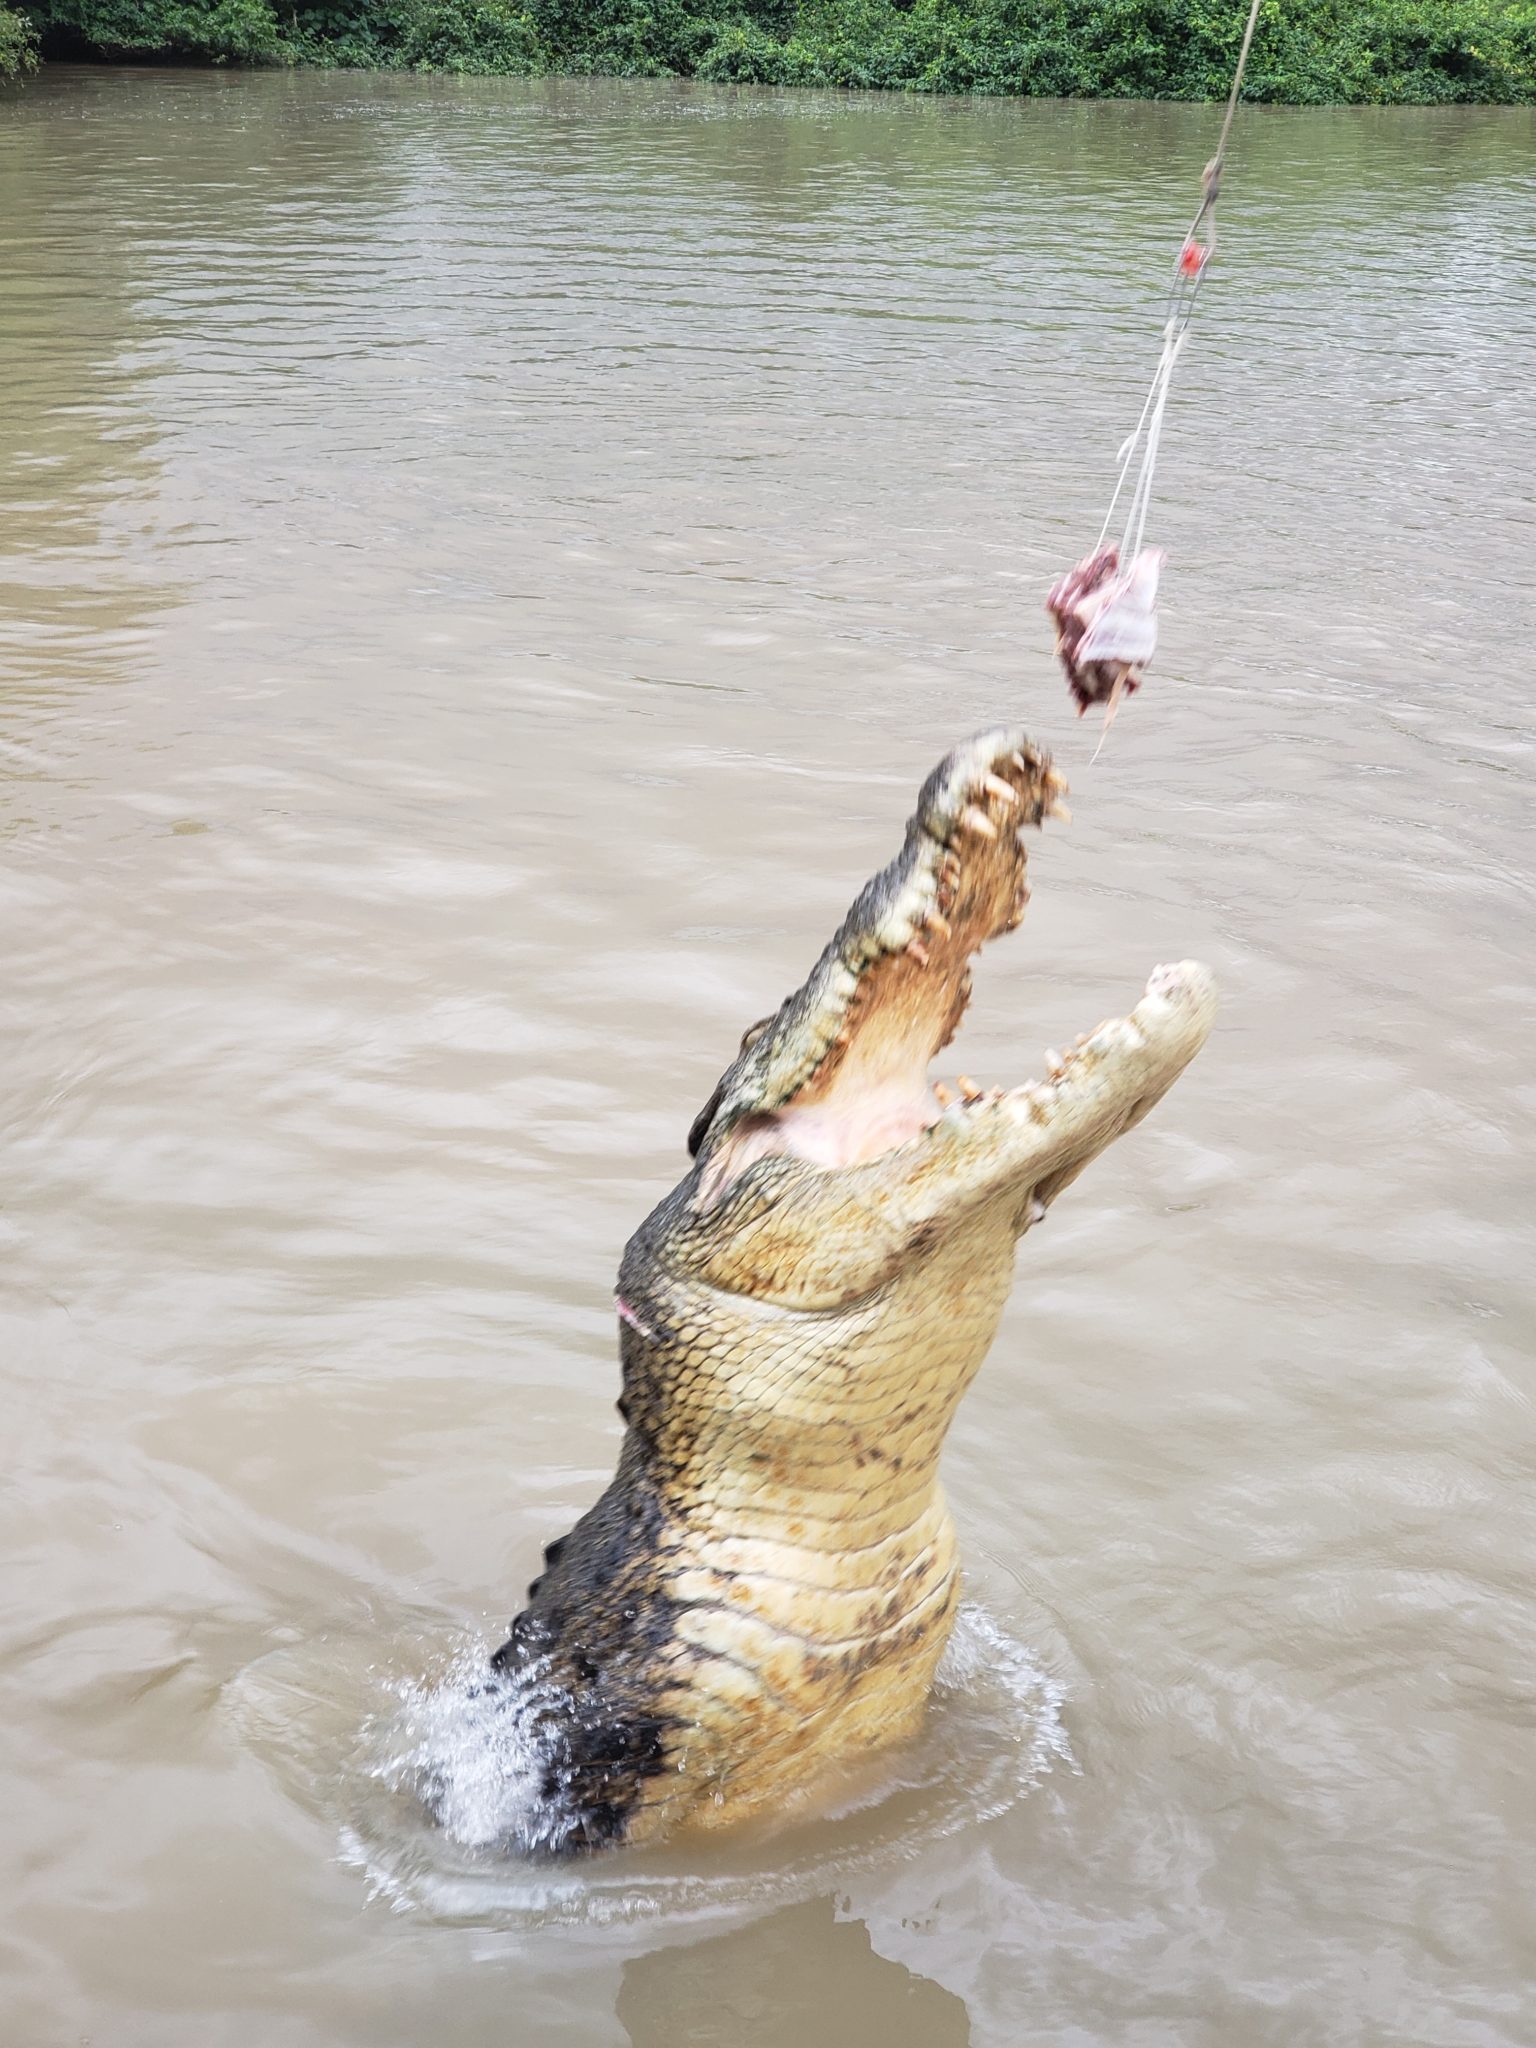 a crocodile jumping in the water